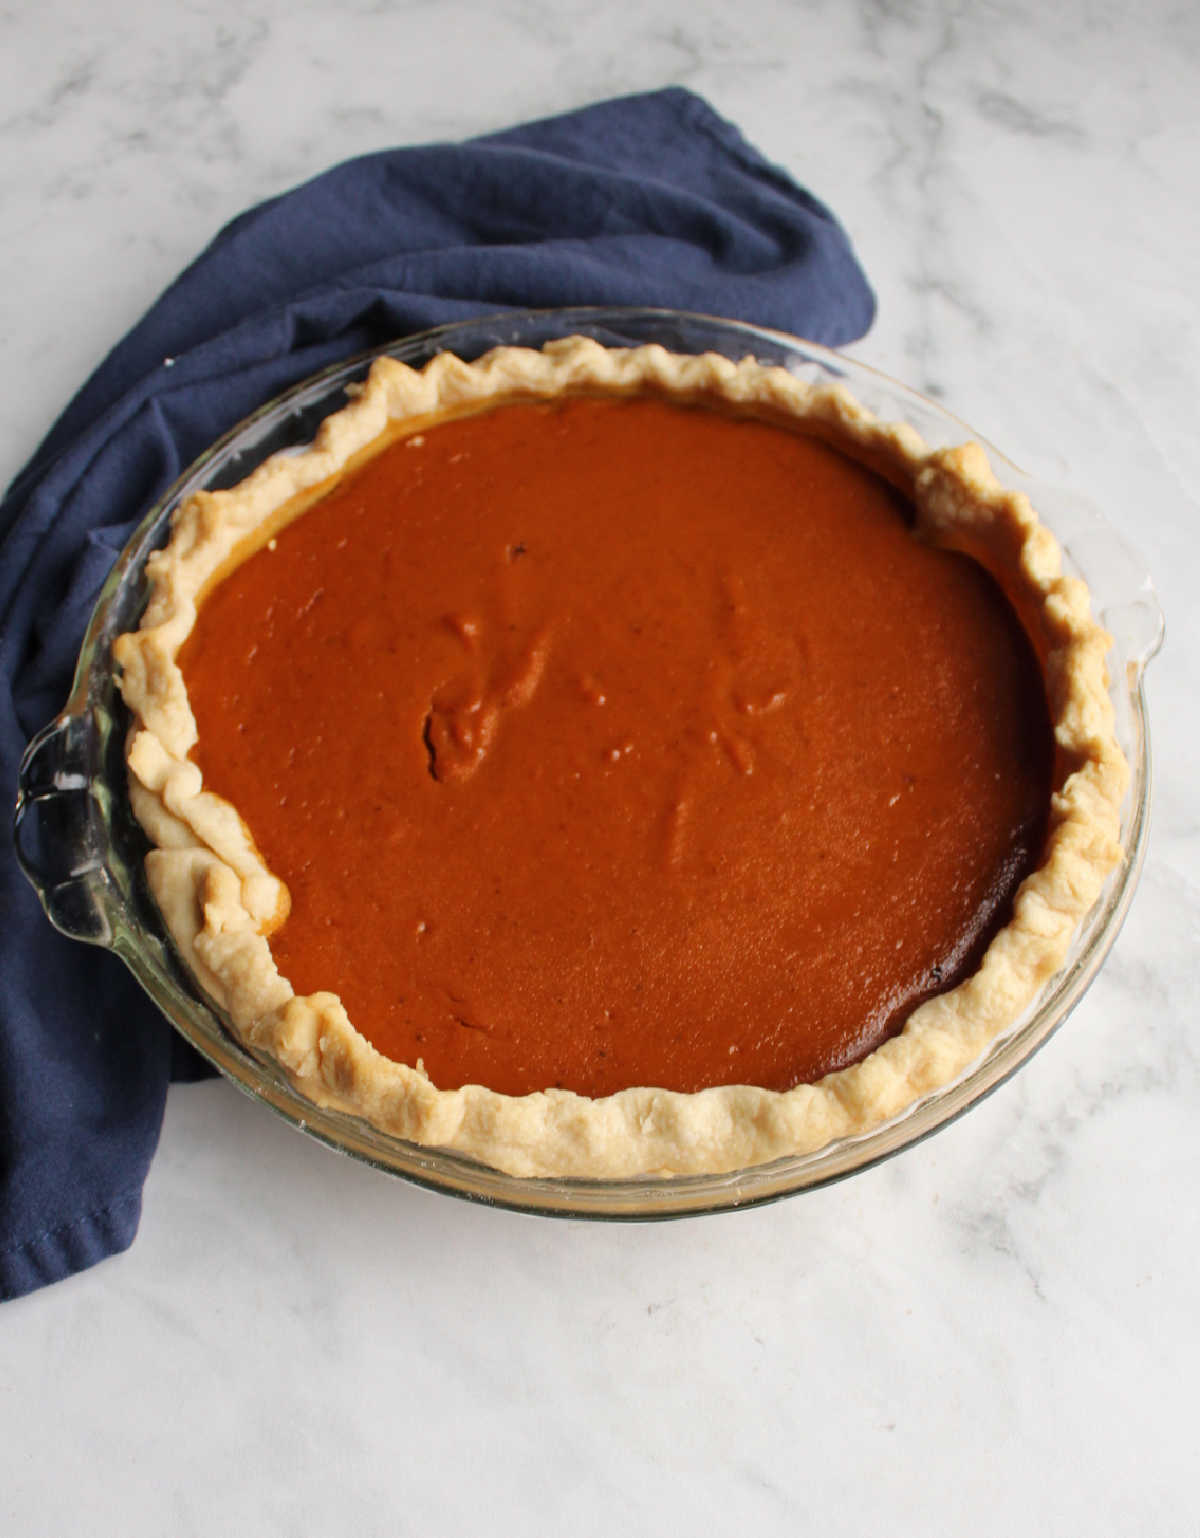 This pumpkin pie is kissed with a bit of maple flavor to heighten the warm sweet notes. Such a small change makes a big difference!